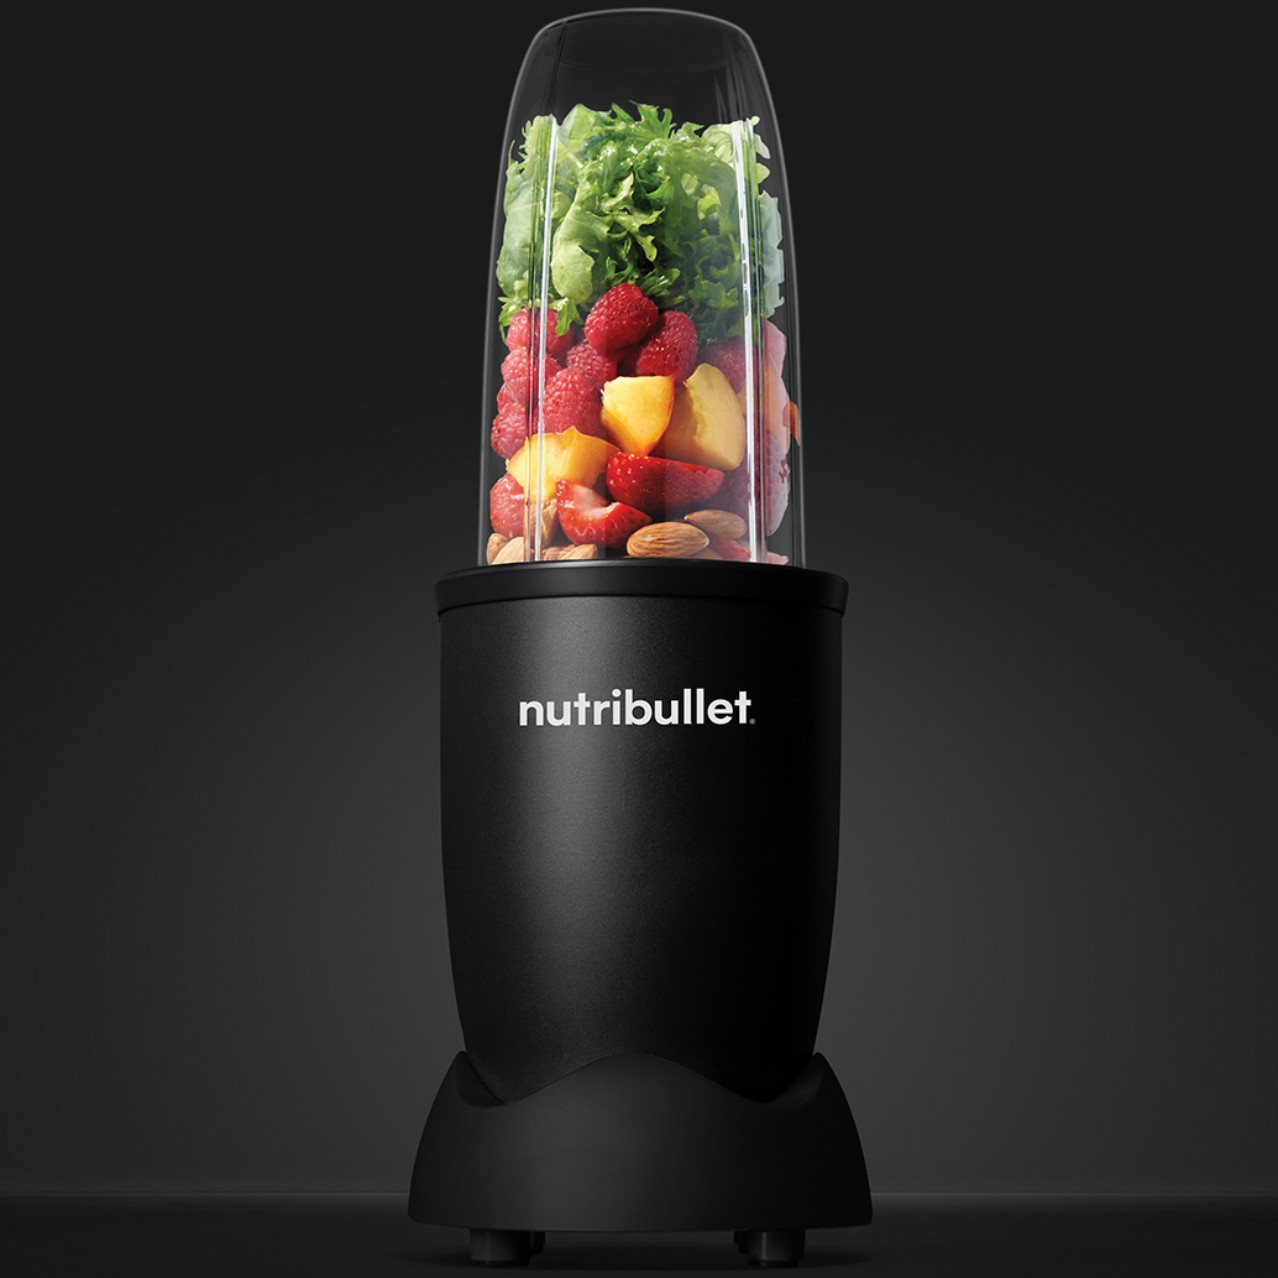 Review: I Tried the Nutribullet Pro Blender and It Lives Up to the